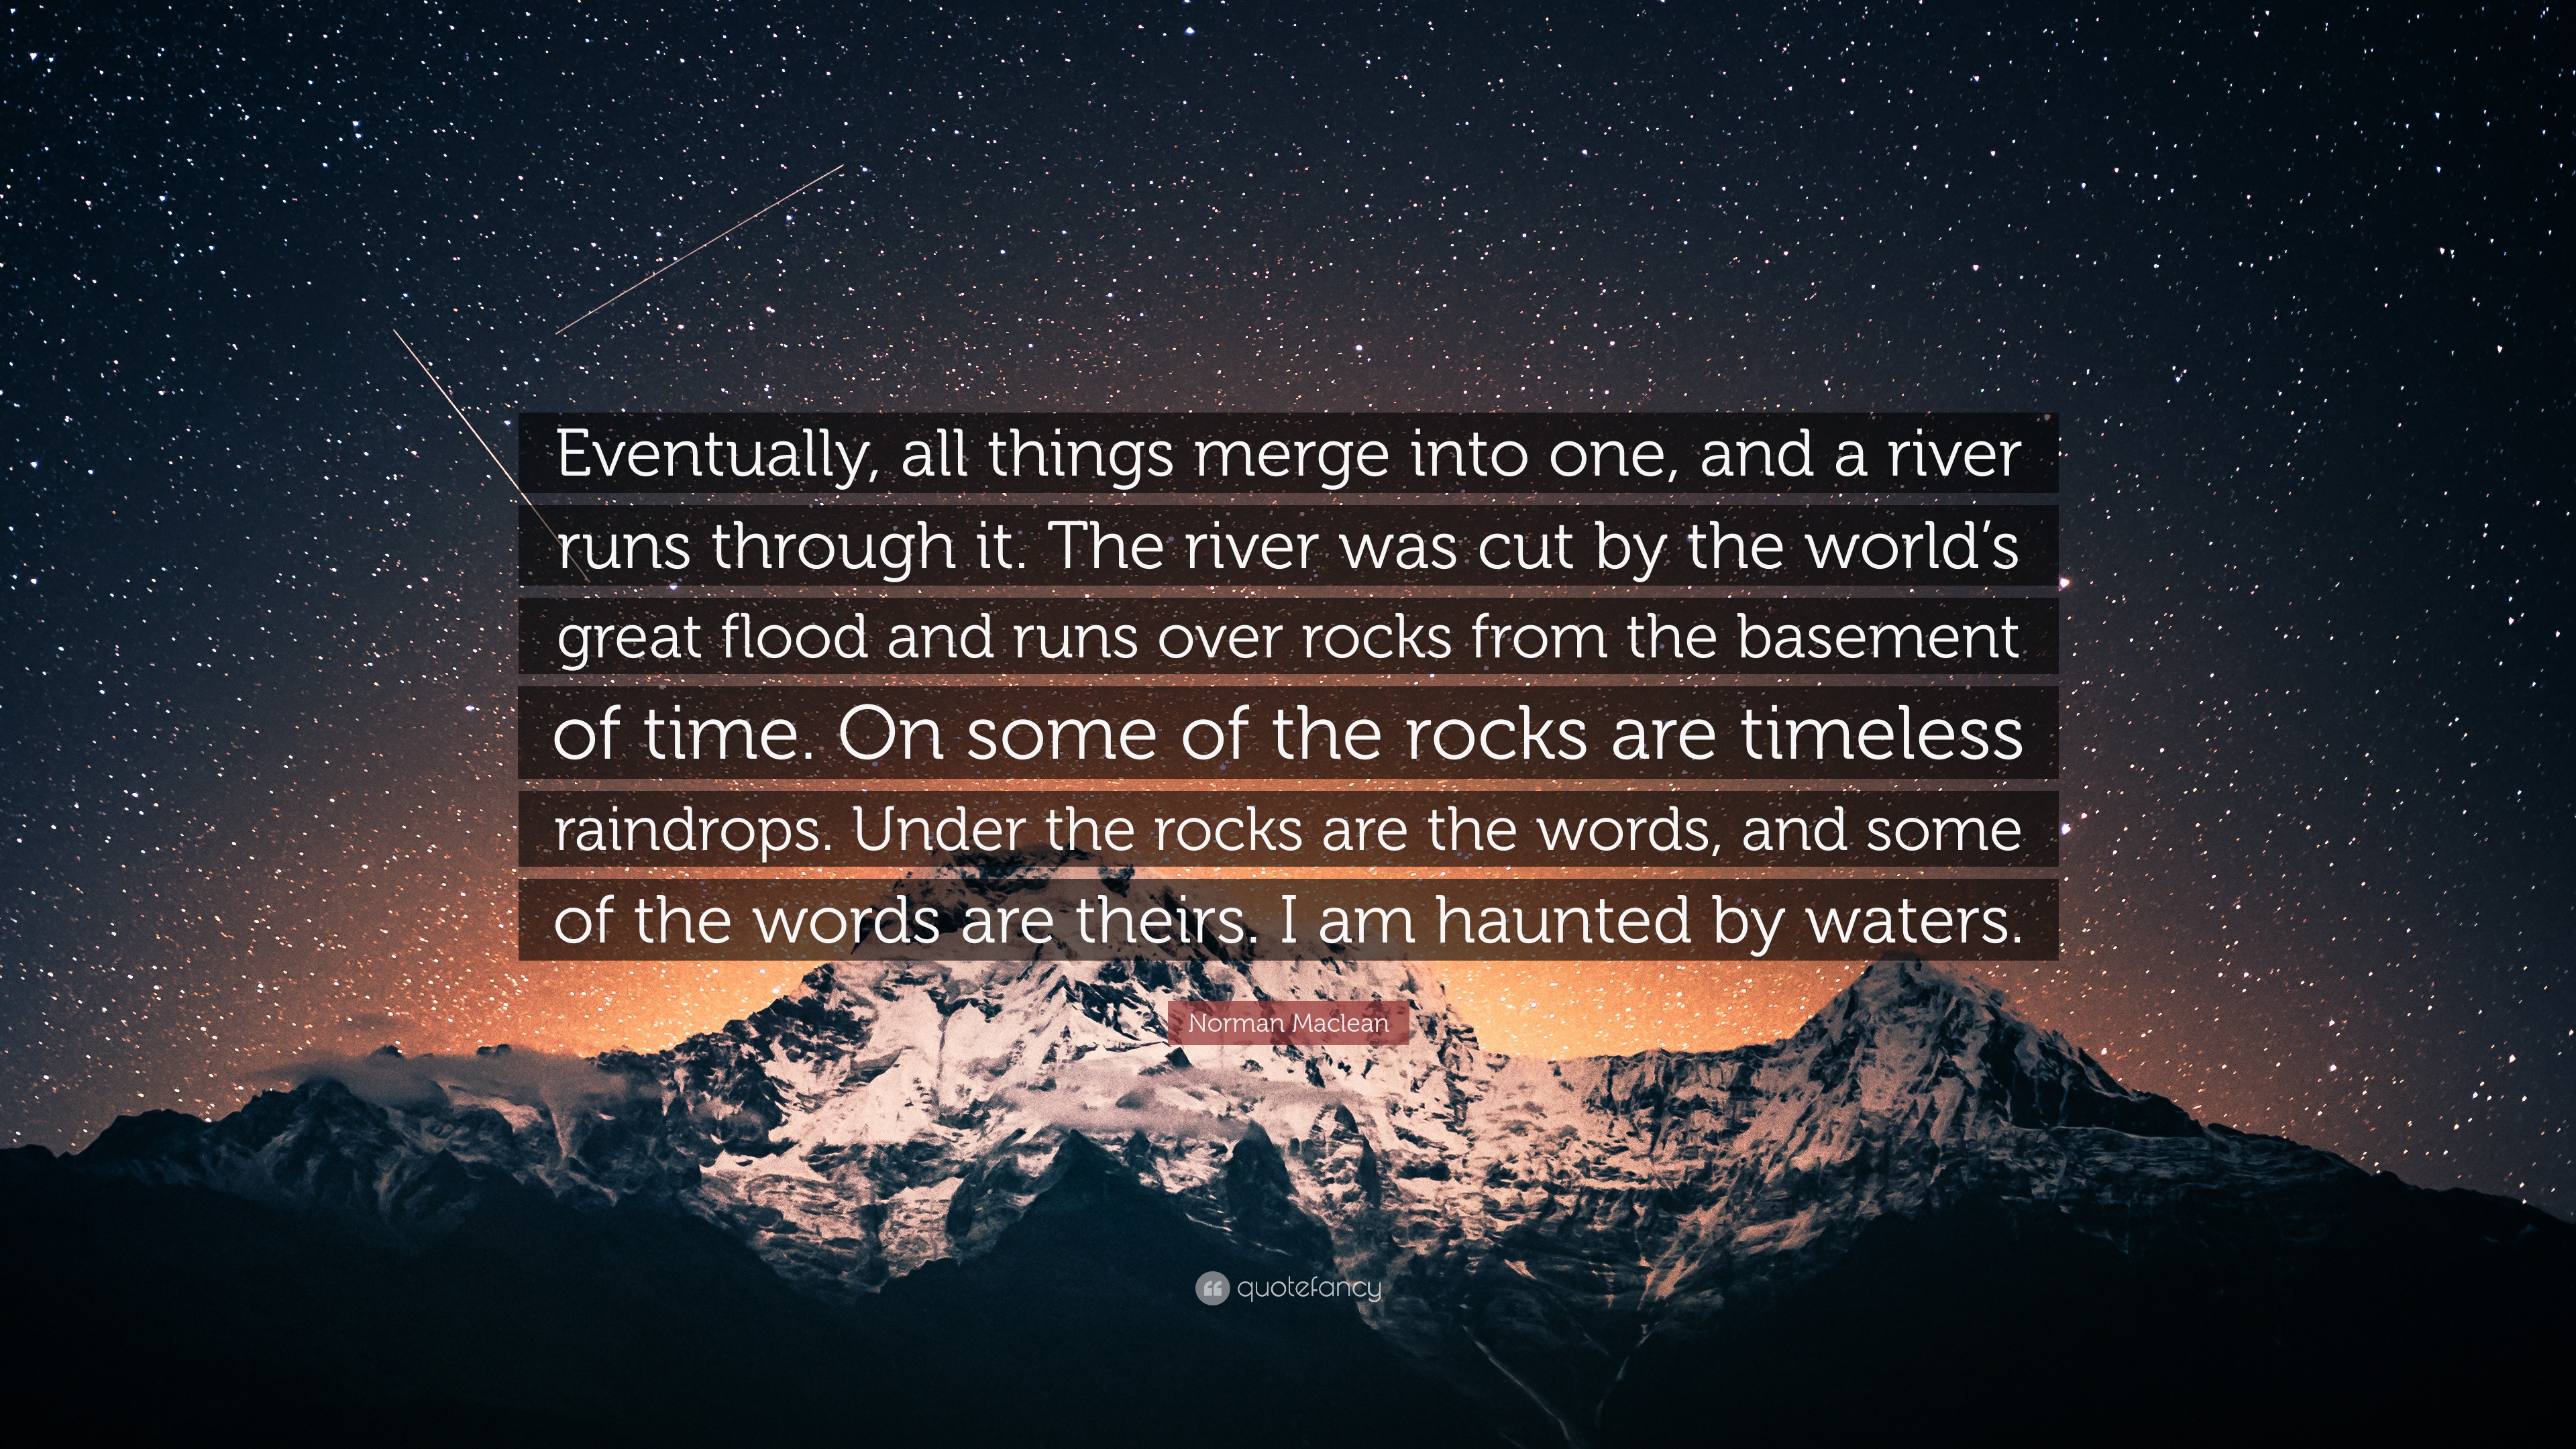 Norman Maclean Quote: "Eventually, all things merge into one, and a river runs through it. The ...